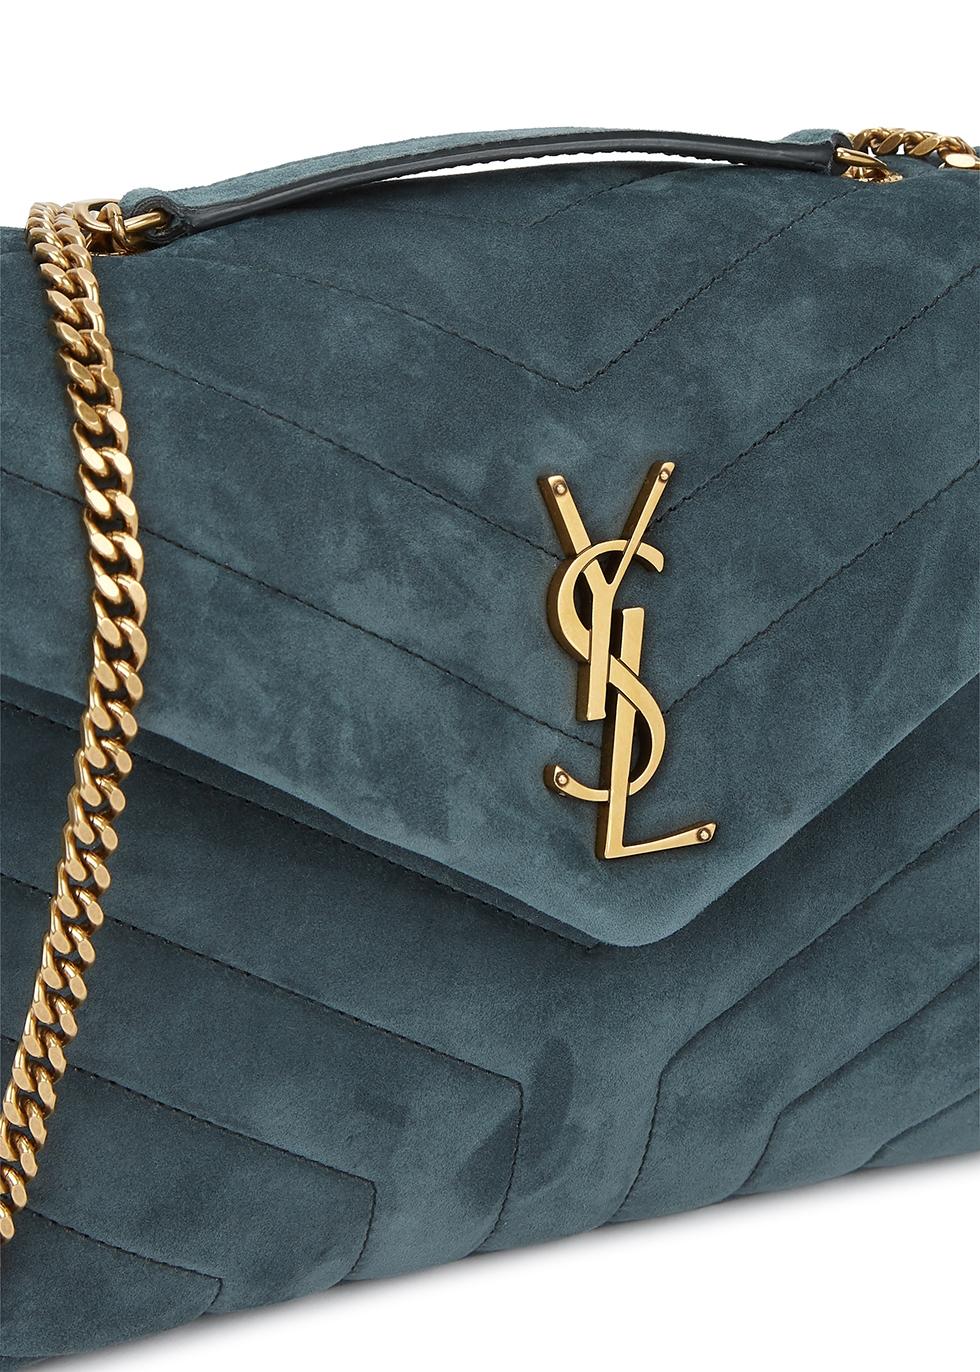 Saint Laurent Loulou Puffer Small Teal Suede Shoulder Bag in Blue | Lyst